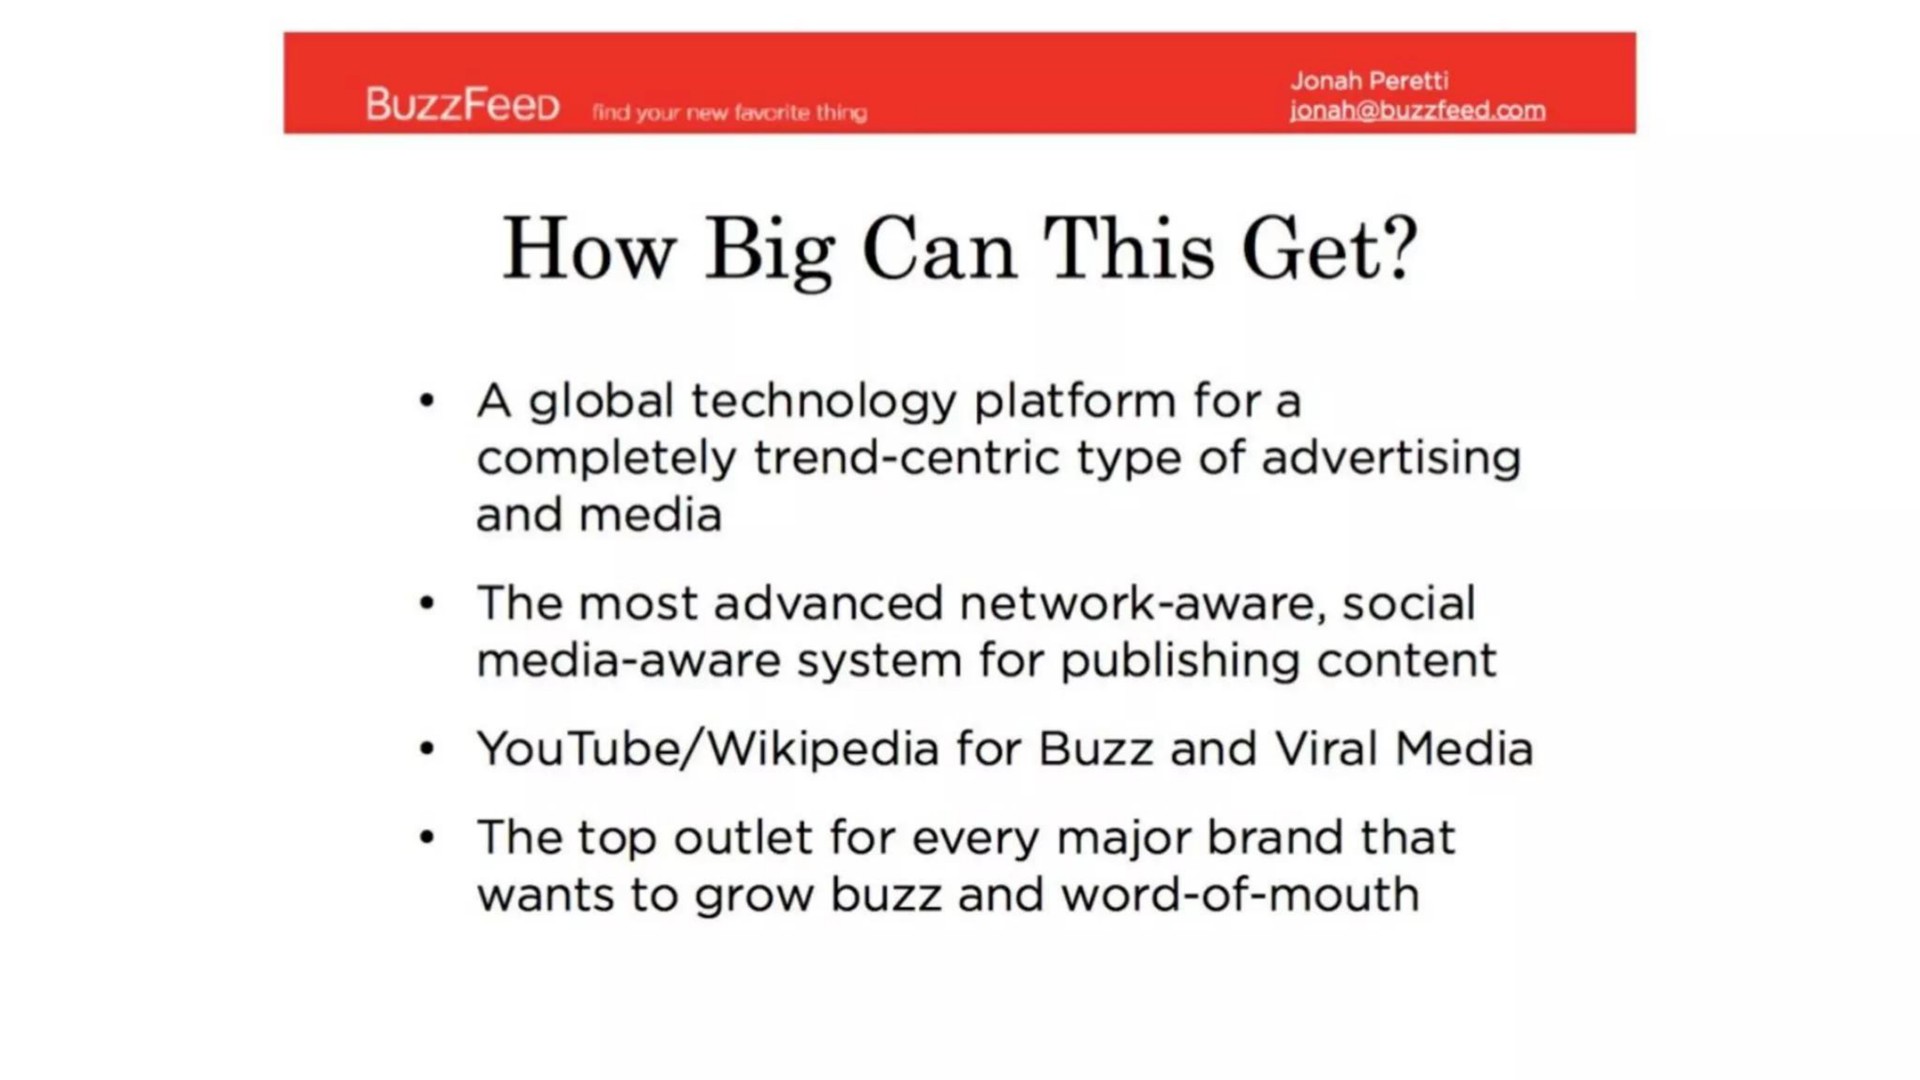 tind you new how big can this get a global technology platform fora completely trend centric type of advertising and media the most advanced network aware social media aware system for publishing content for buzz and viral media the top outlet for every major brand that wants to grow buzz and word of mouth | BuzzFeed